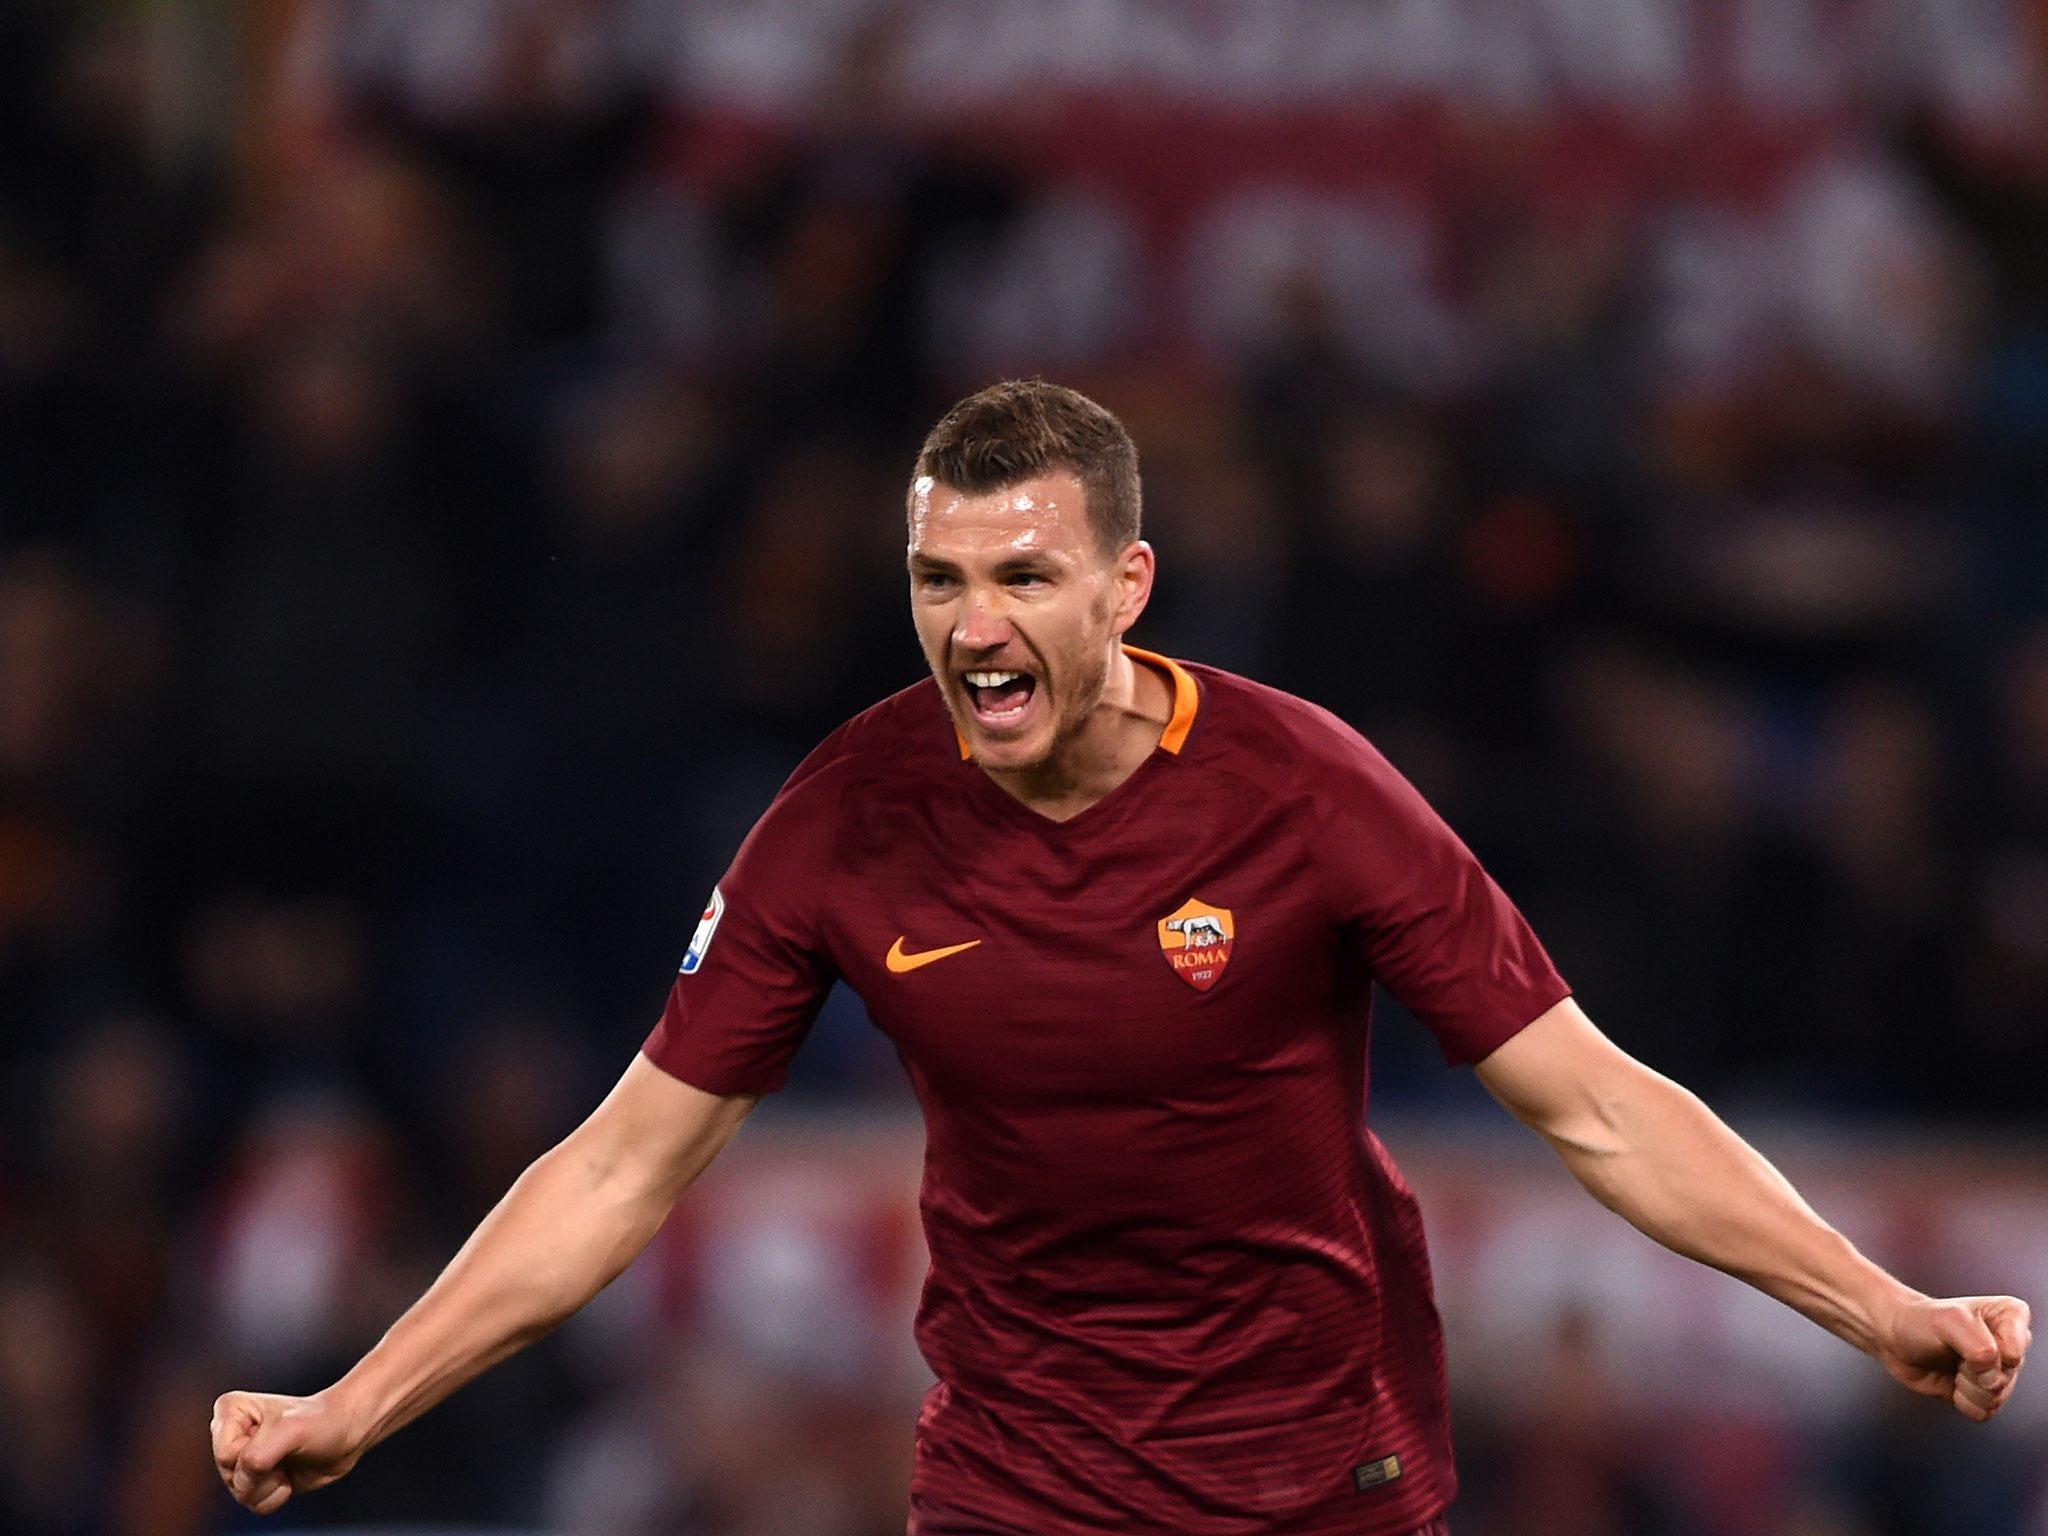 Dzeko has scored 35 goals in all competitions this season